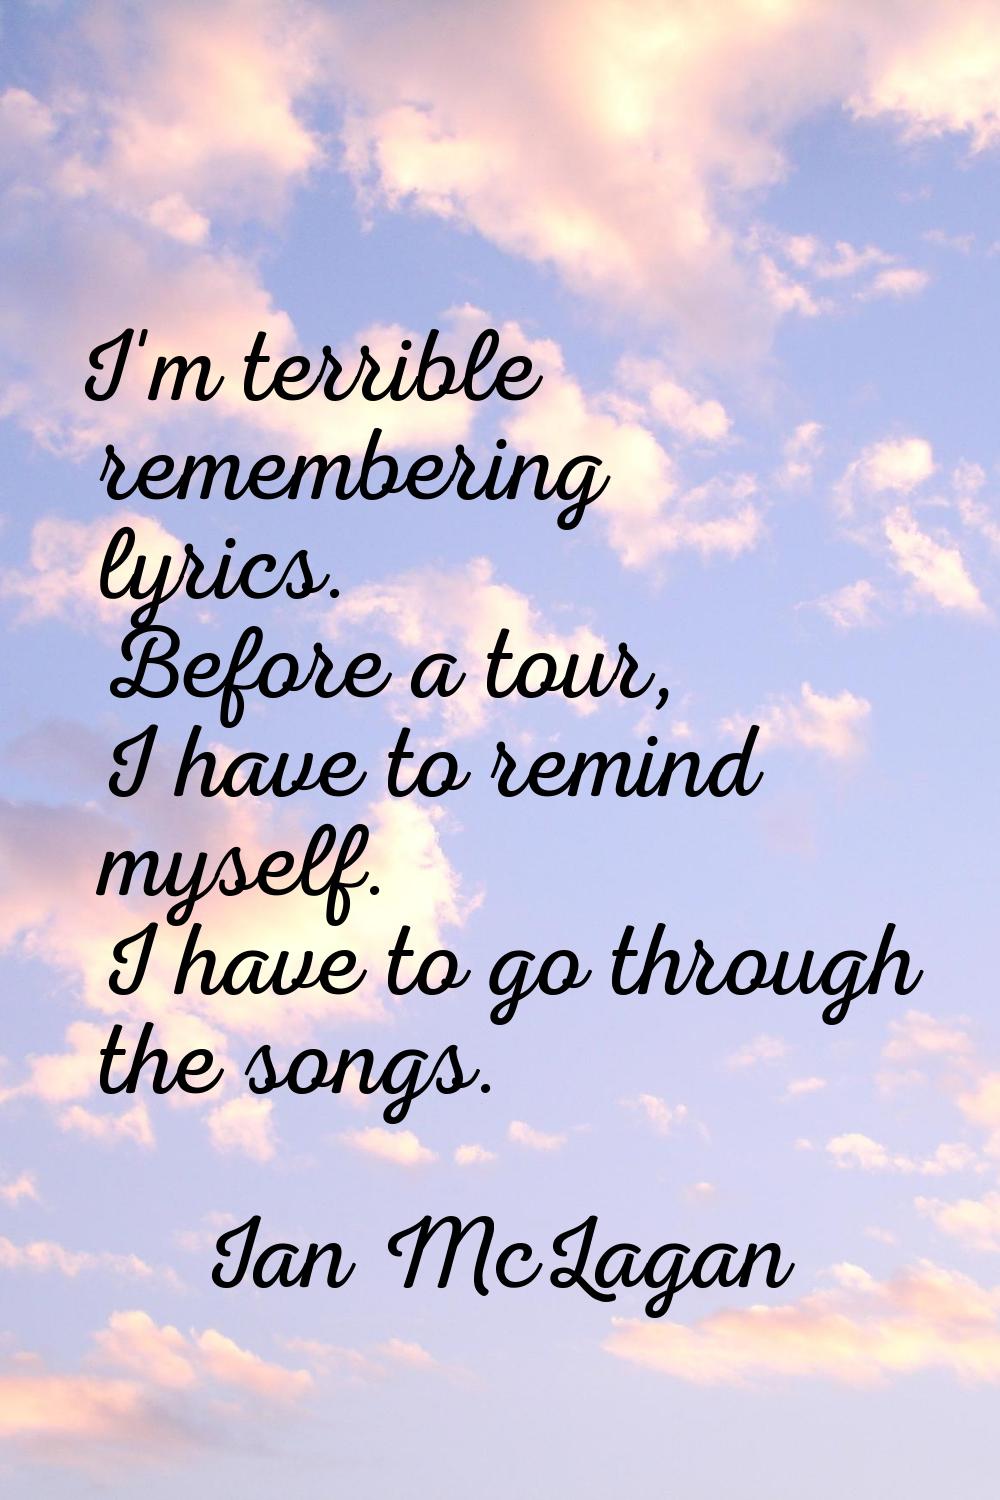 I'm terrible remembering lyrics. Before a tour, I have to remind myself. I have to go through the s